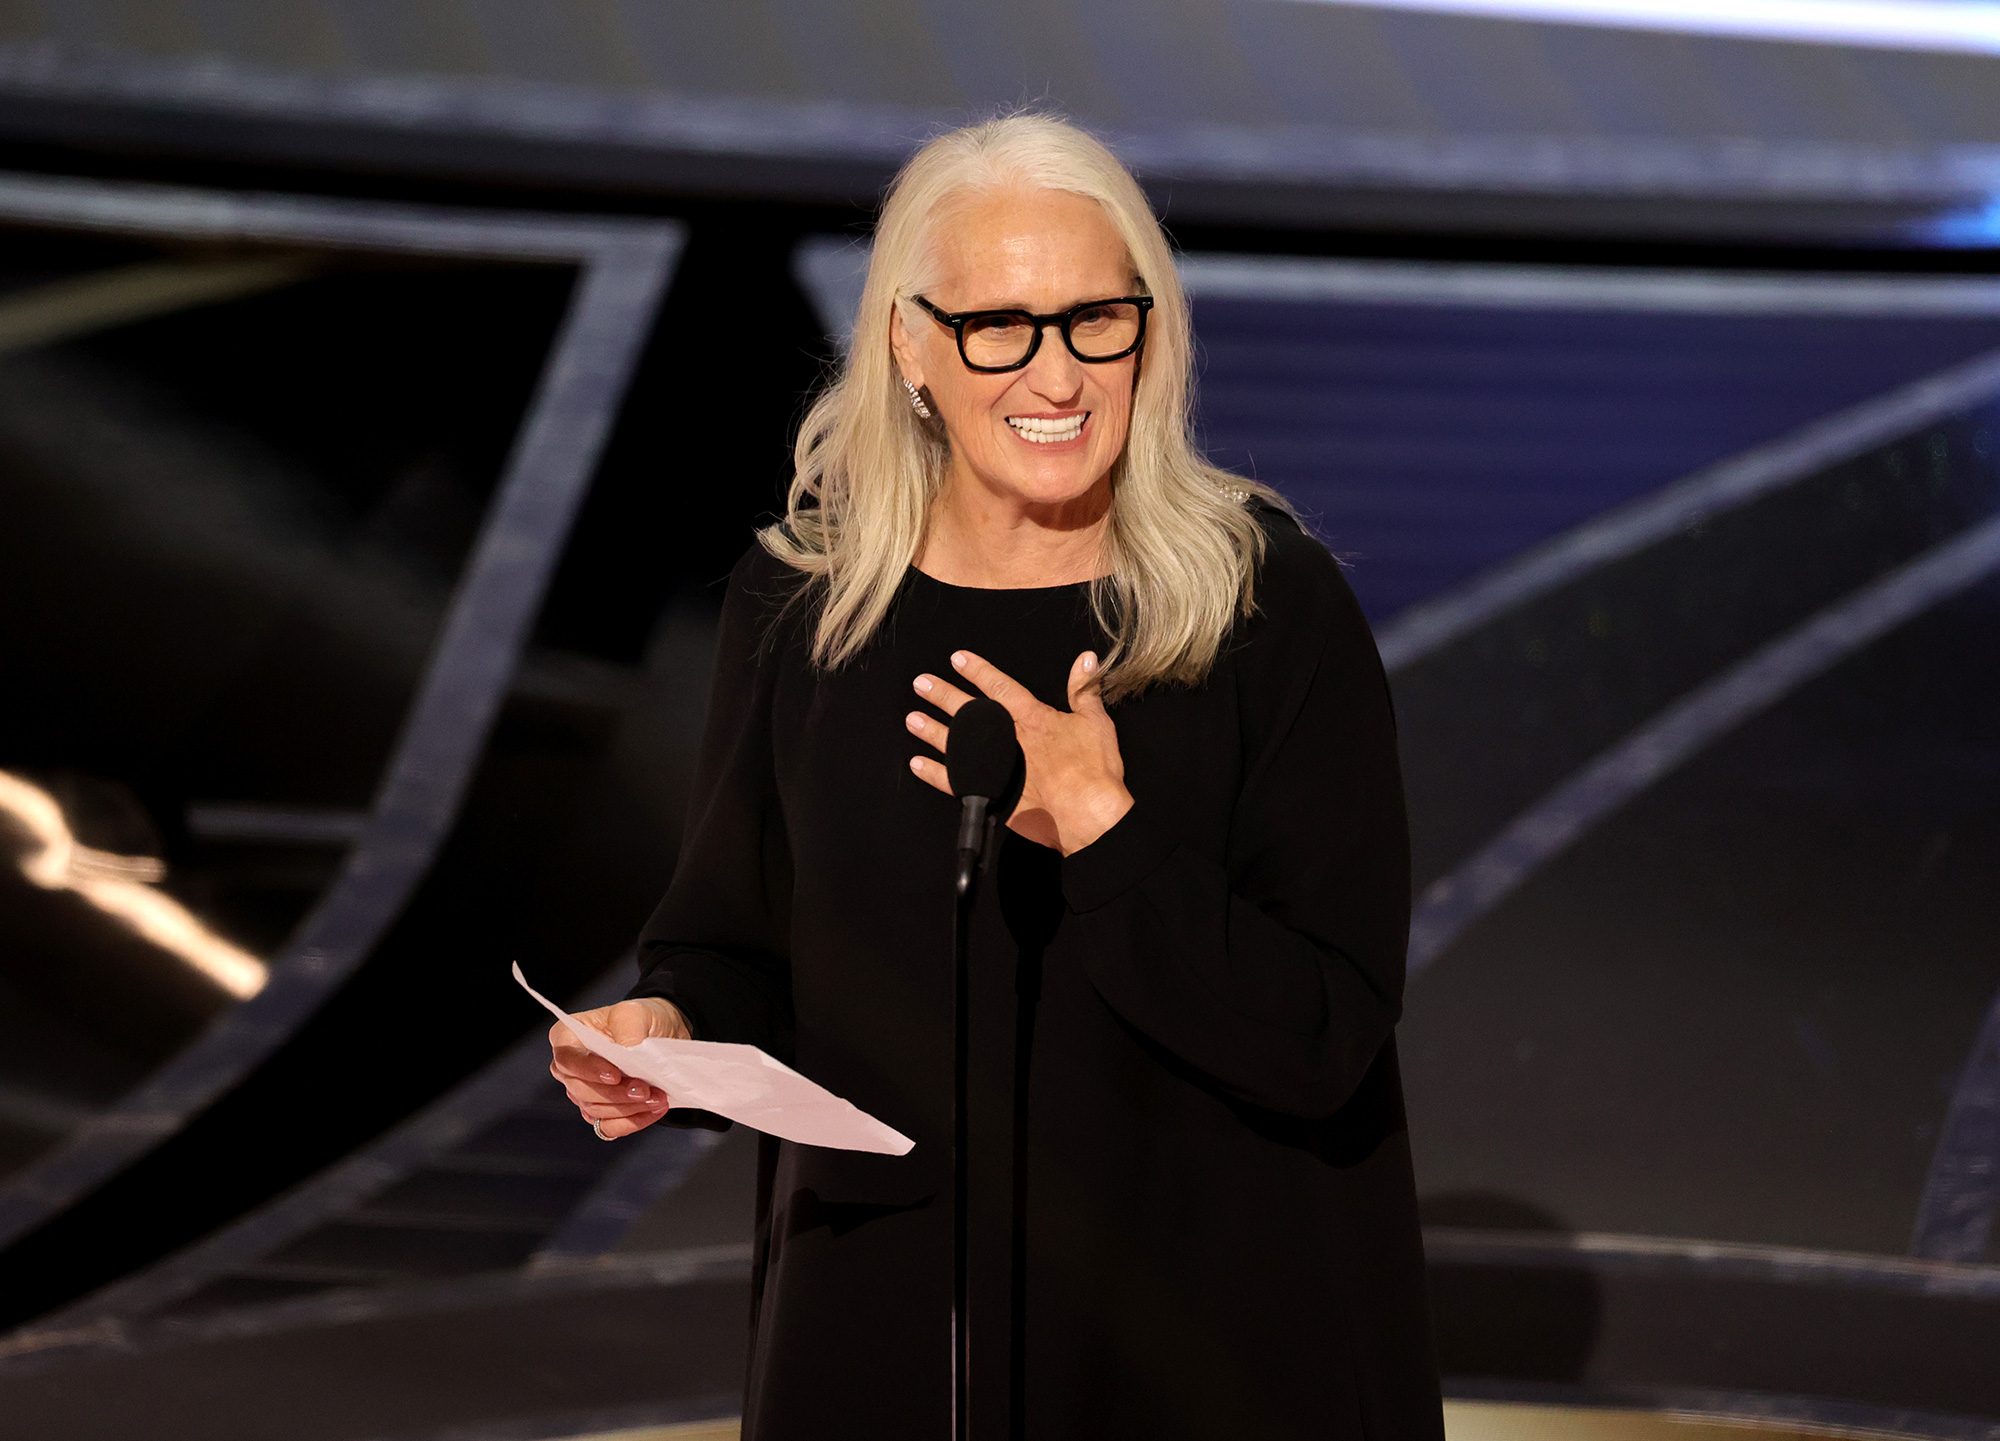 Jane Campion accepts the directing award for "The Power of the Dog" onstage during the 94th Annual Academy Awards.